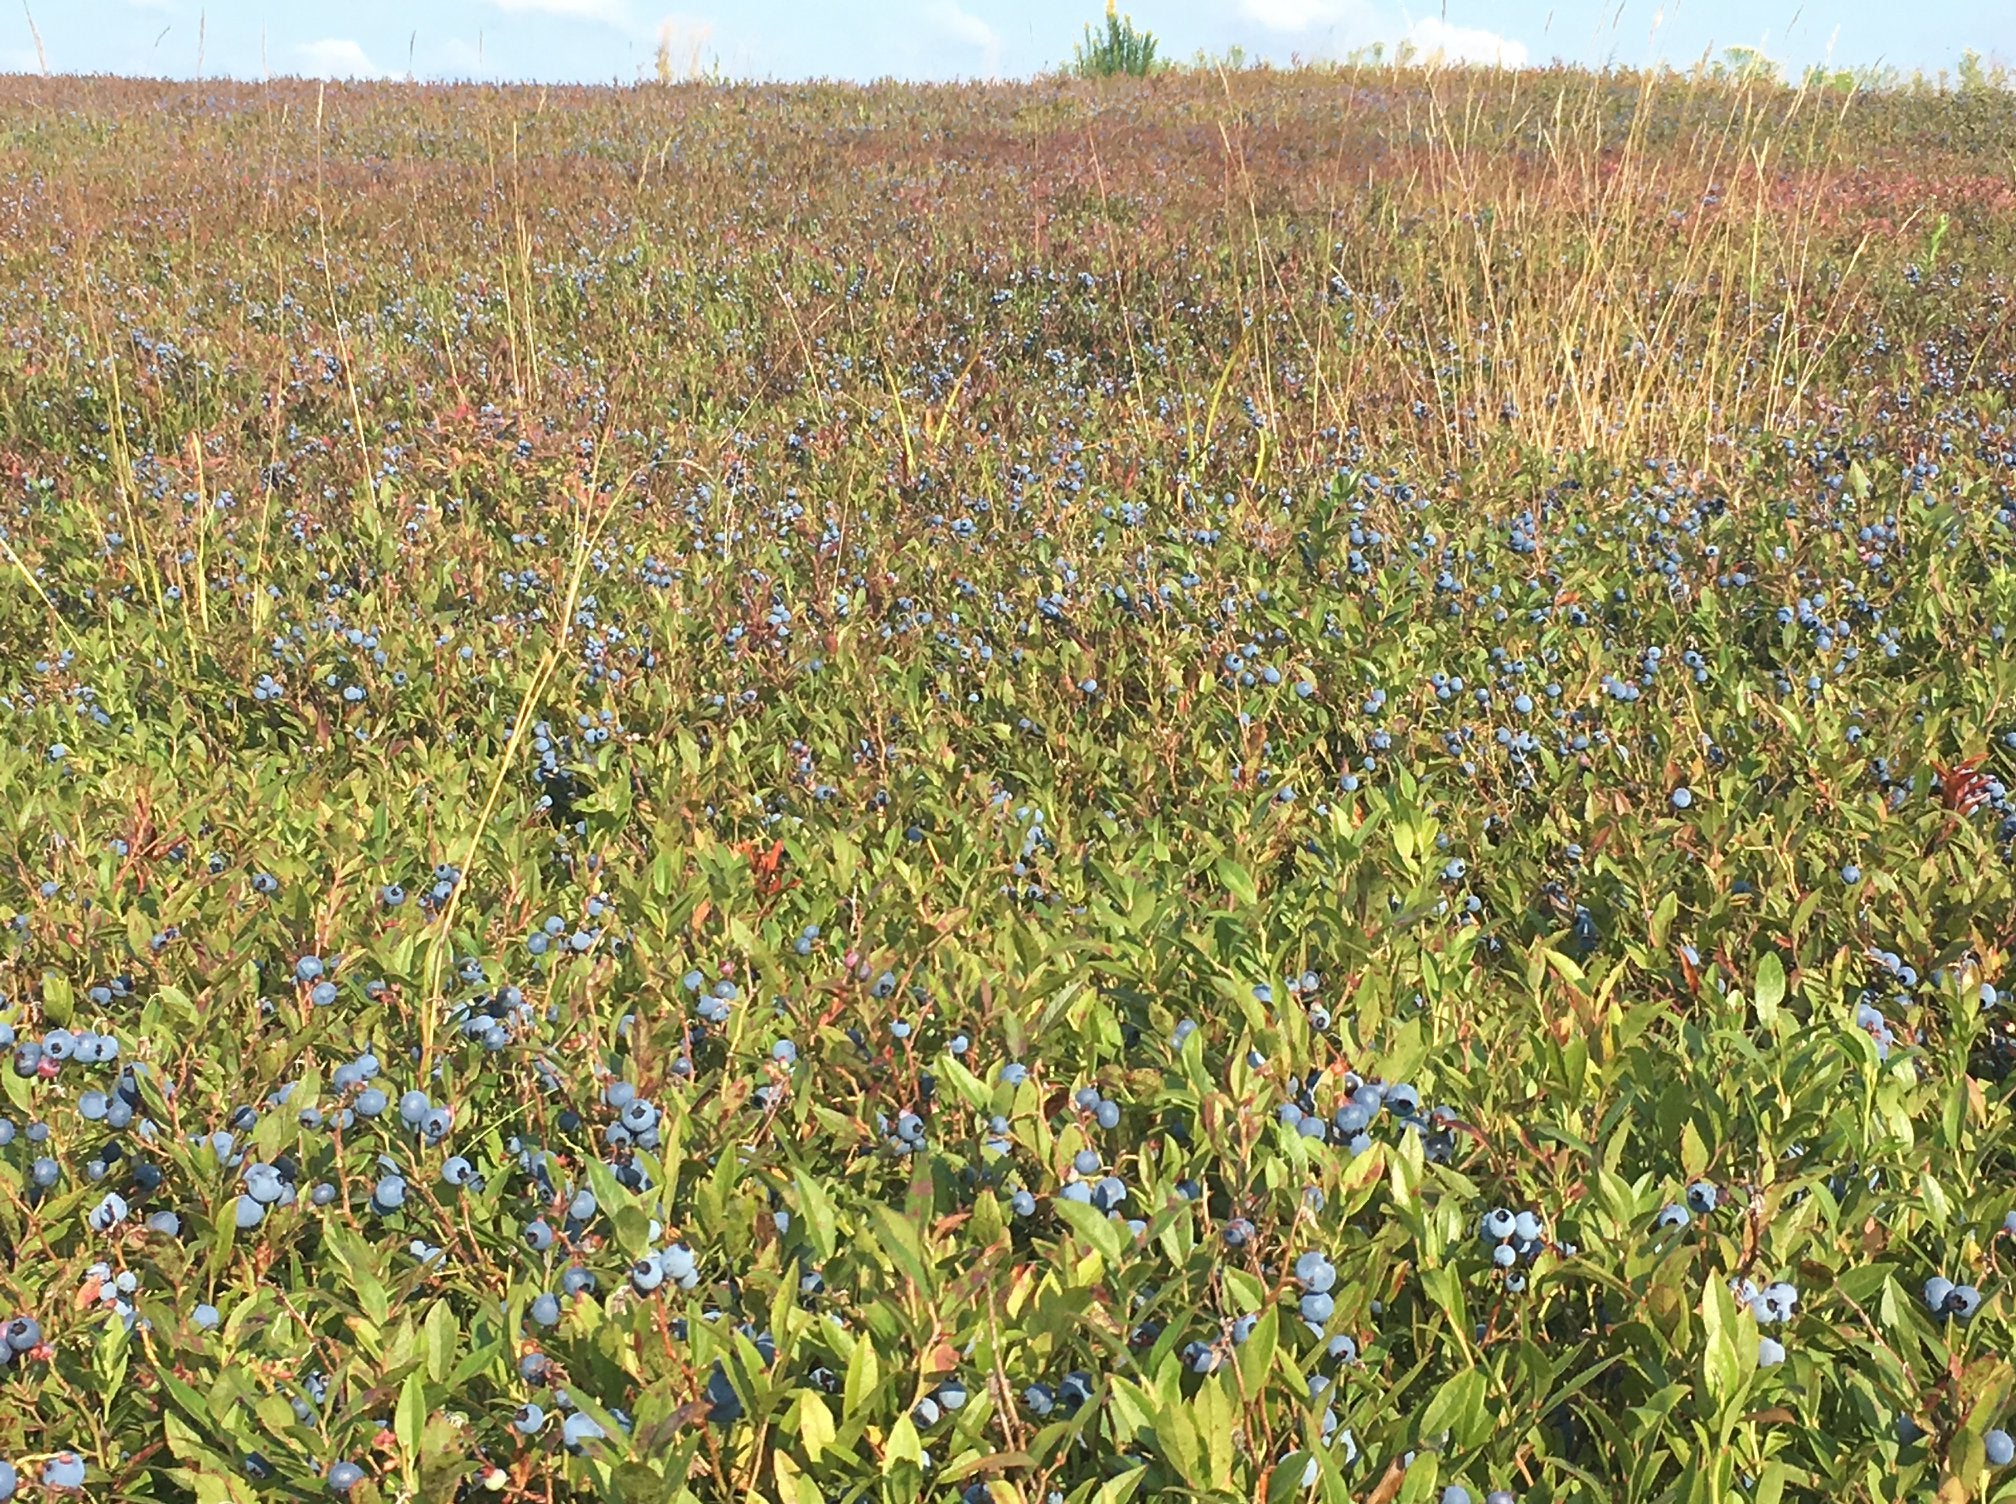 Blueberry Fields Forever at Bleuet Hill Farm - Natural Contents